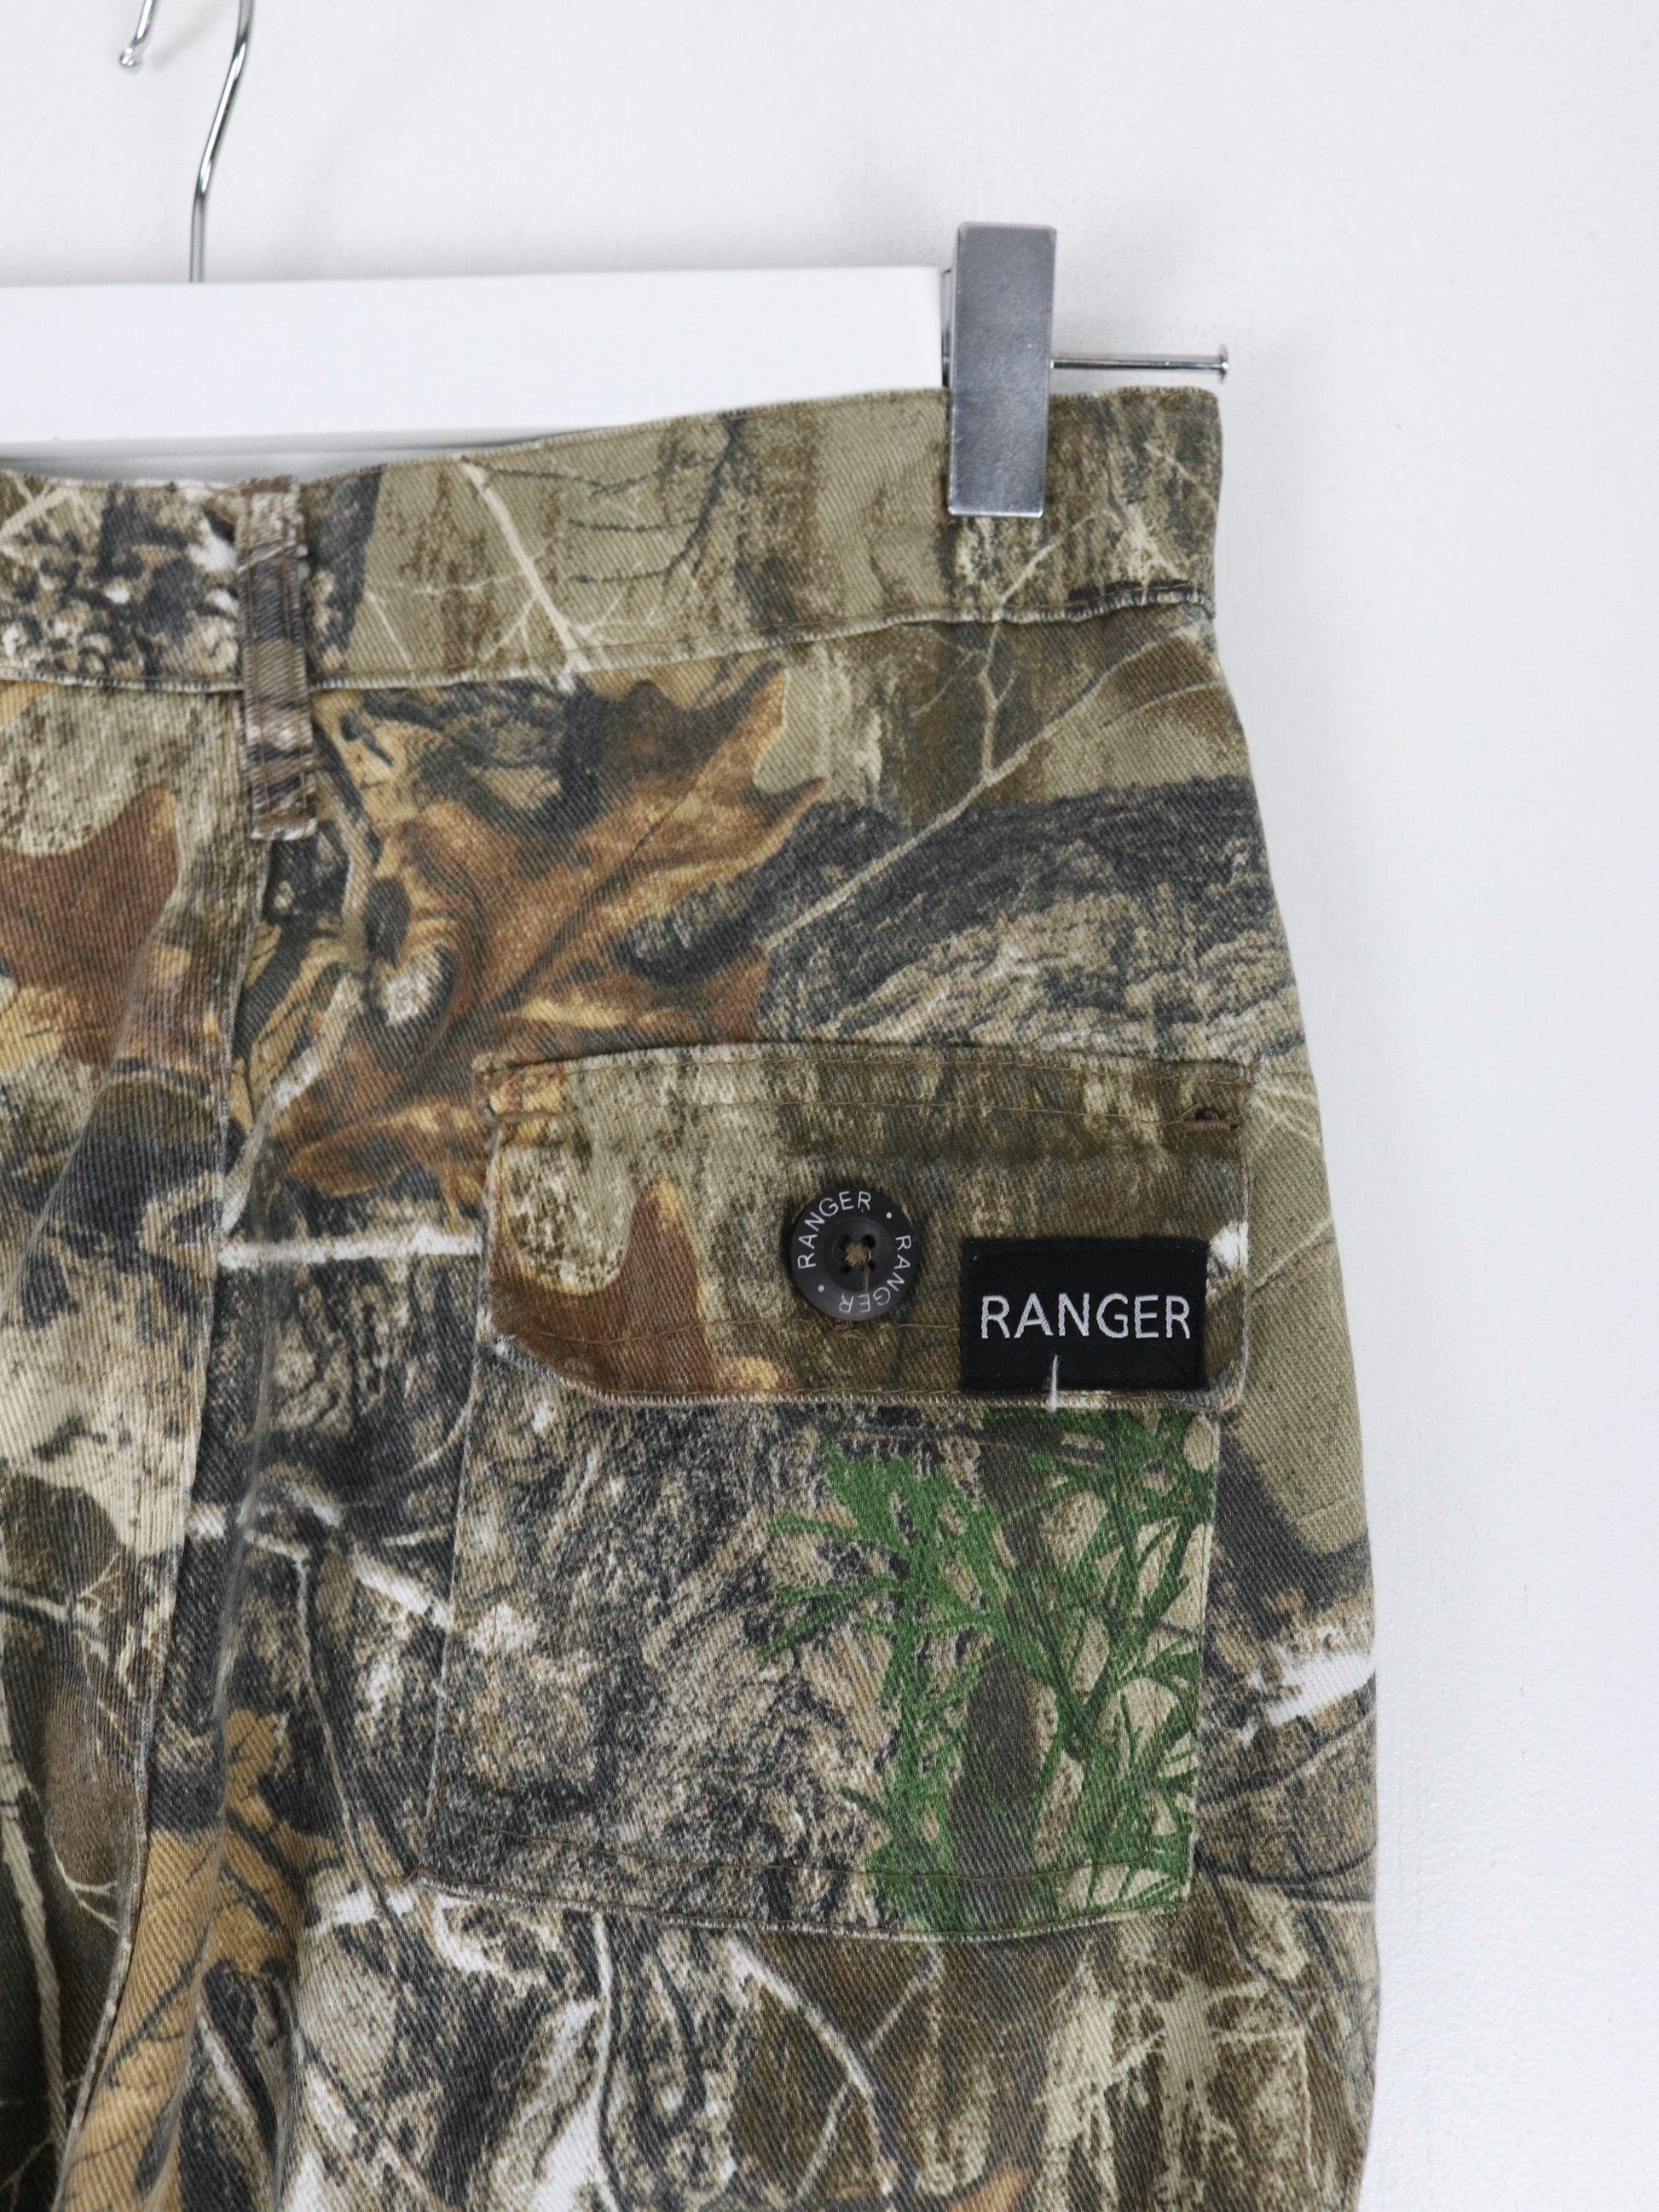 Other Pants Ranger Pants Youth 16 Brown Real Tree Camo Cargo Outdoors 27 x 29